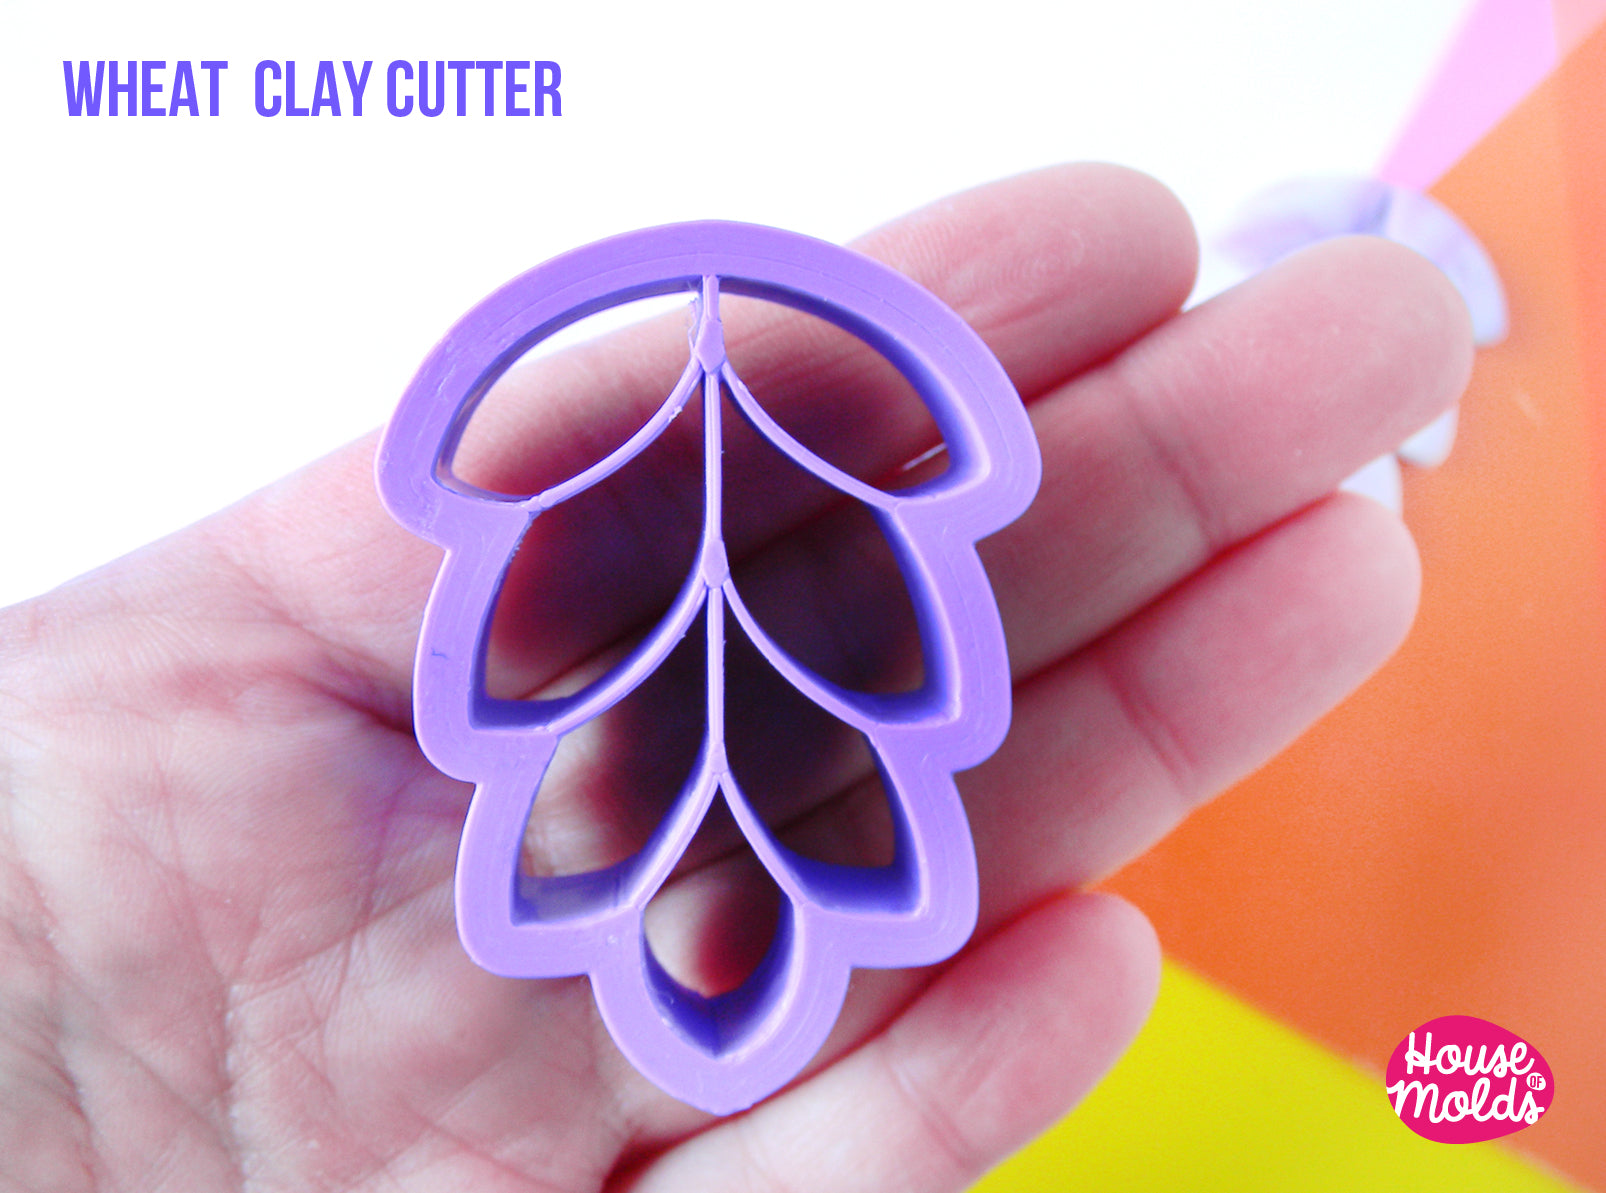 WHEAT SHAPE CLAY CUTTER - BIOBASED PLA - CLEAN CUT EDGES - House of Mo –  House Of Molds